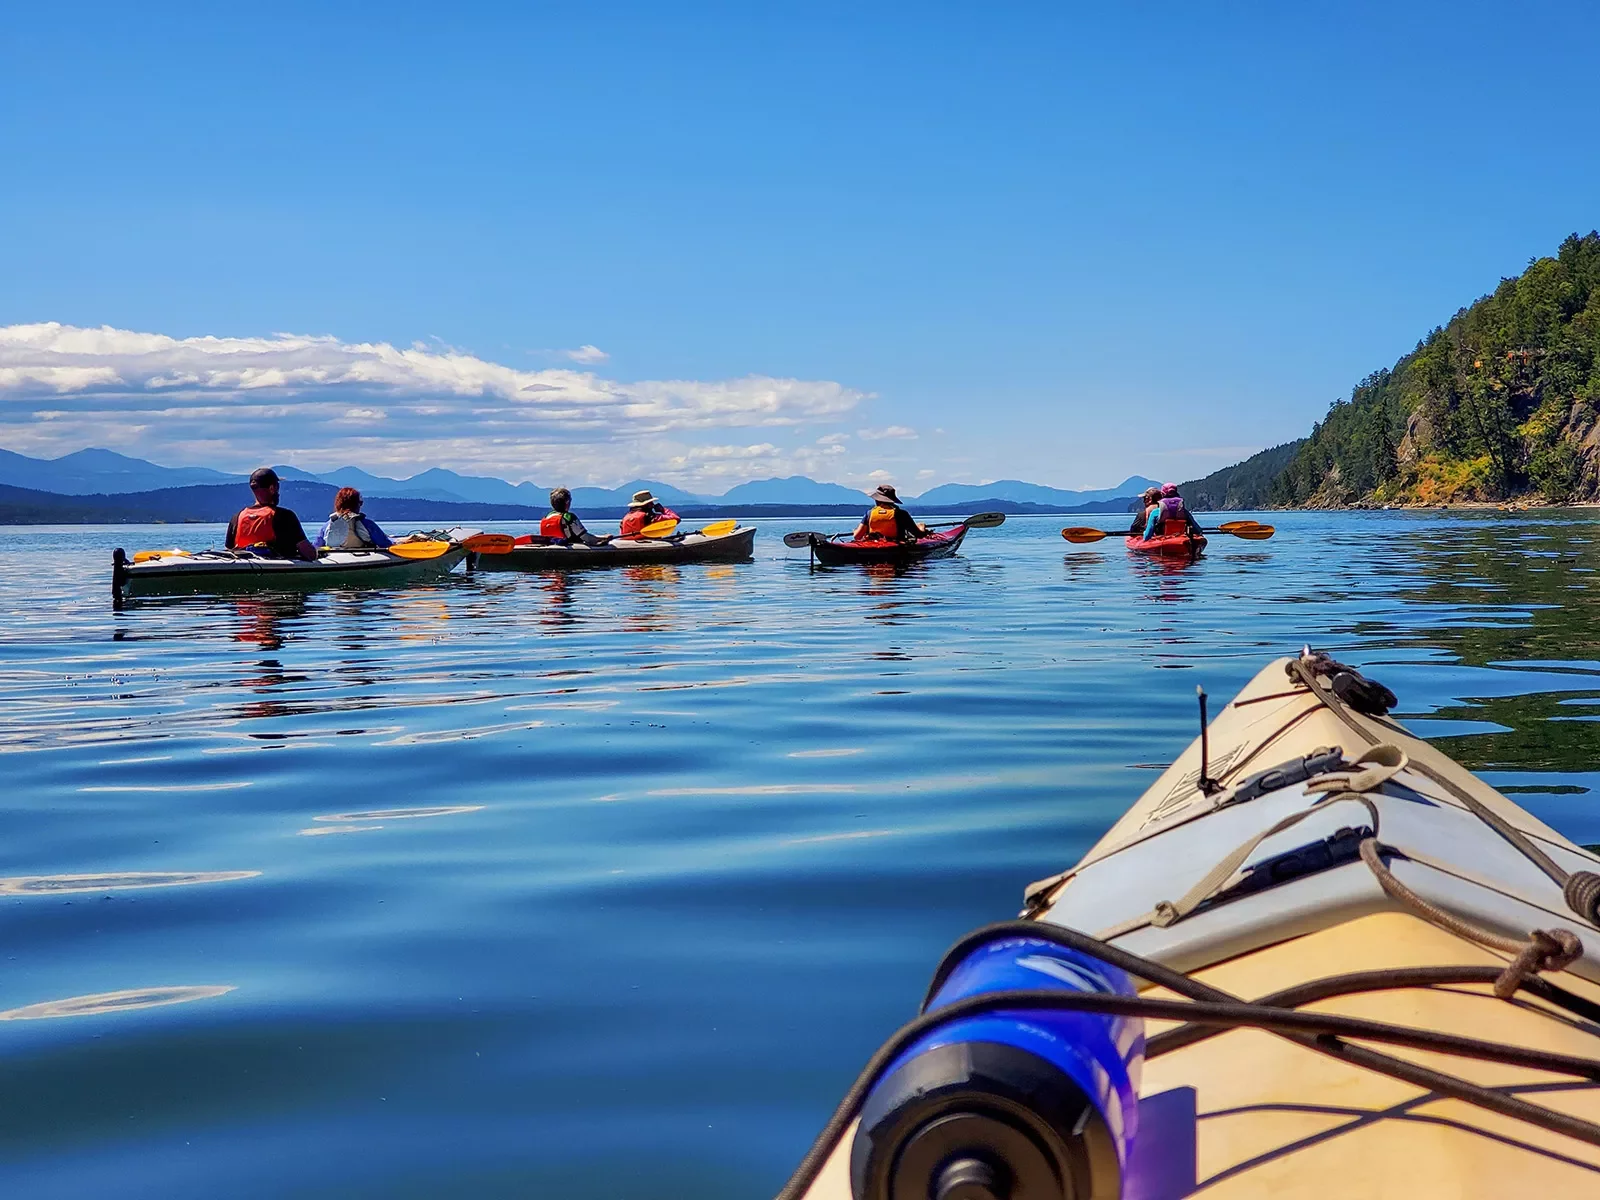 Point of view shot of  guests kayaking, mountains in background.